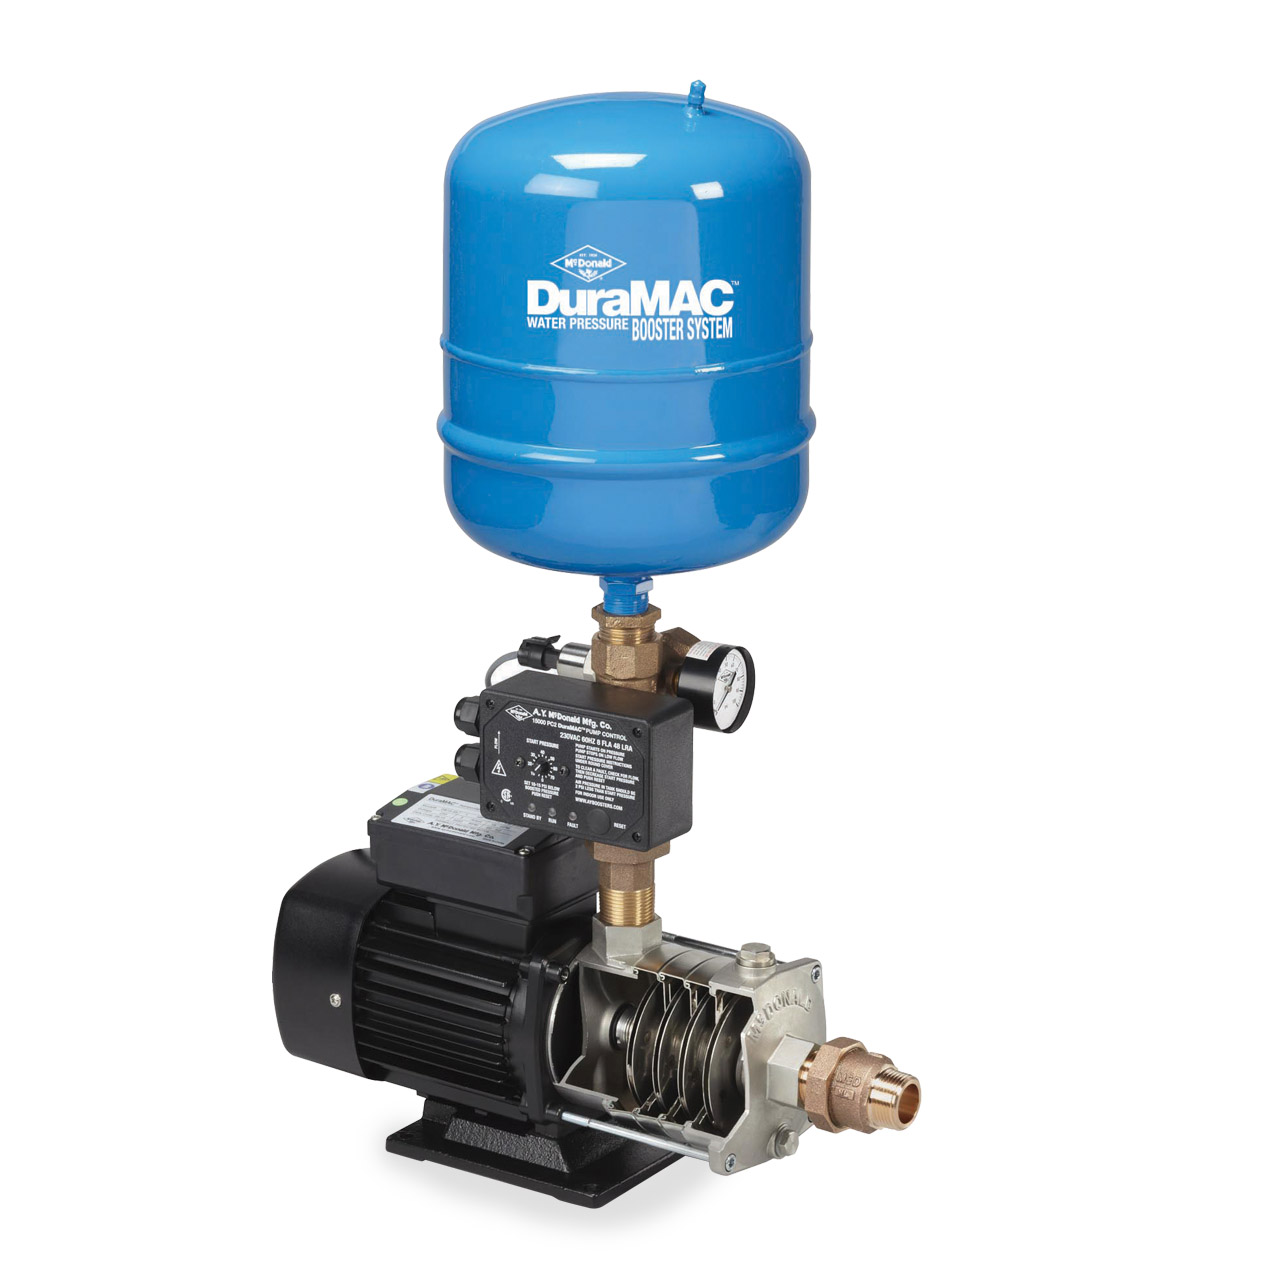 Water Pressure Booster Pump With Multistage Centrifugal Pump Surge Tank  Included - BWXMSD07T 17G40P - 0.75